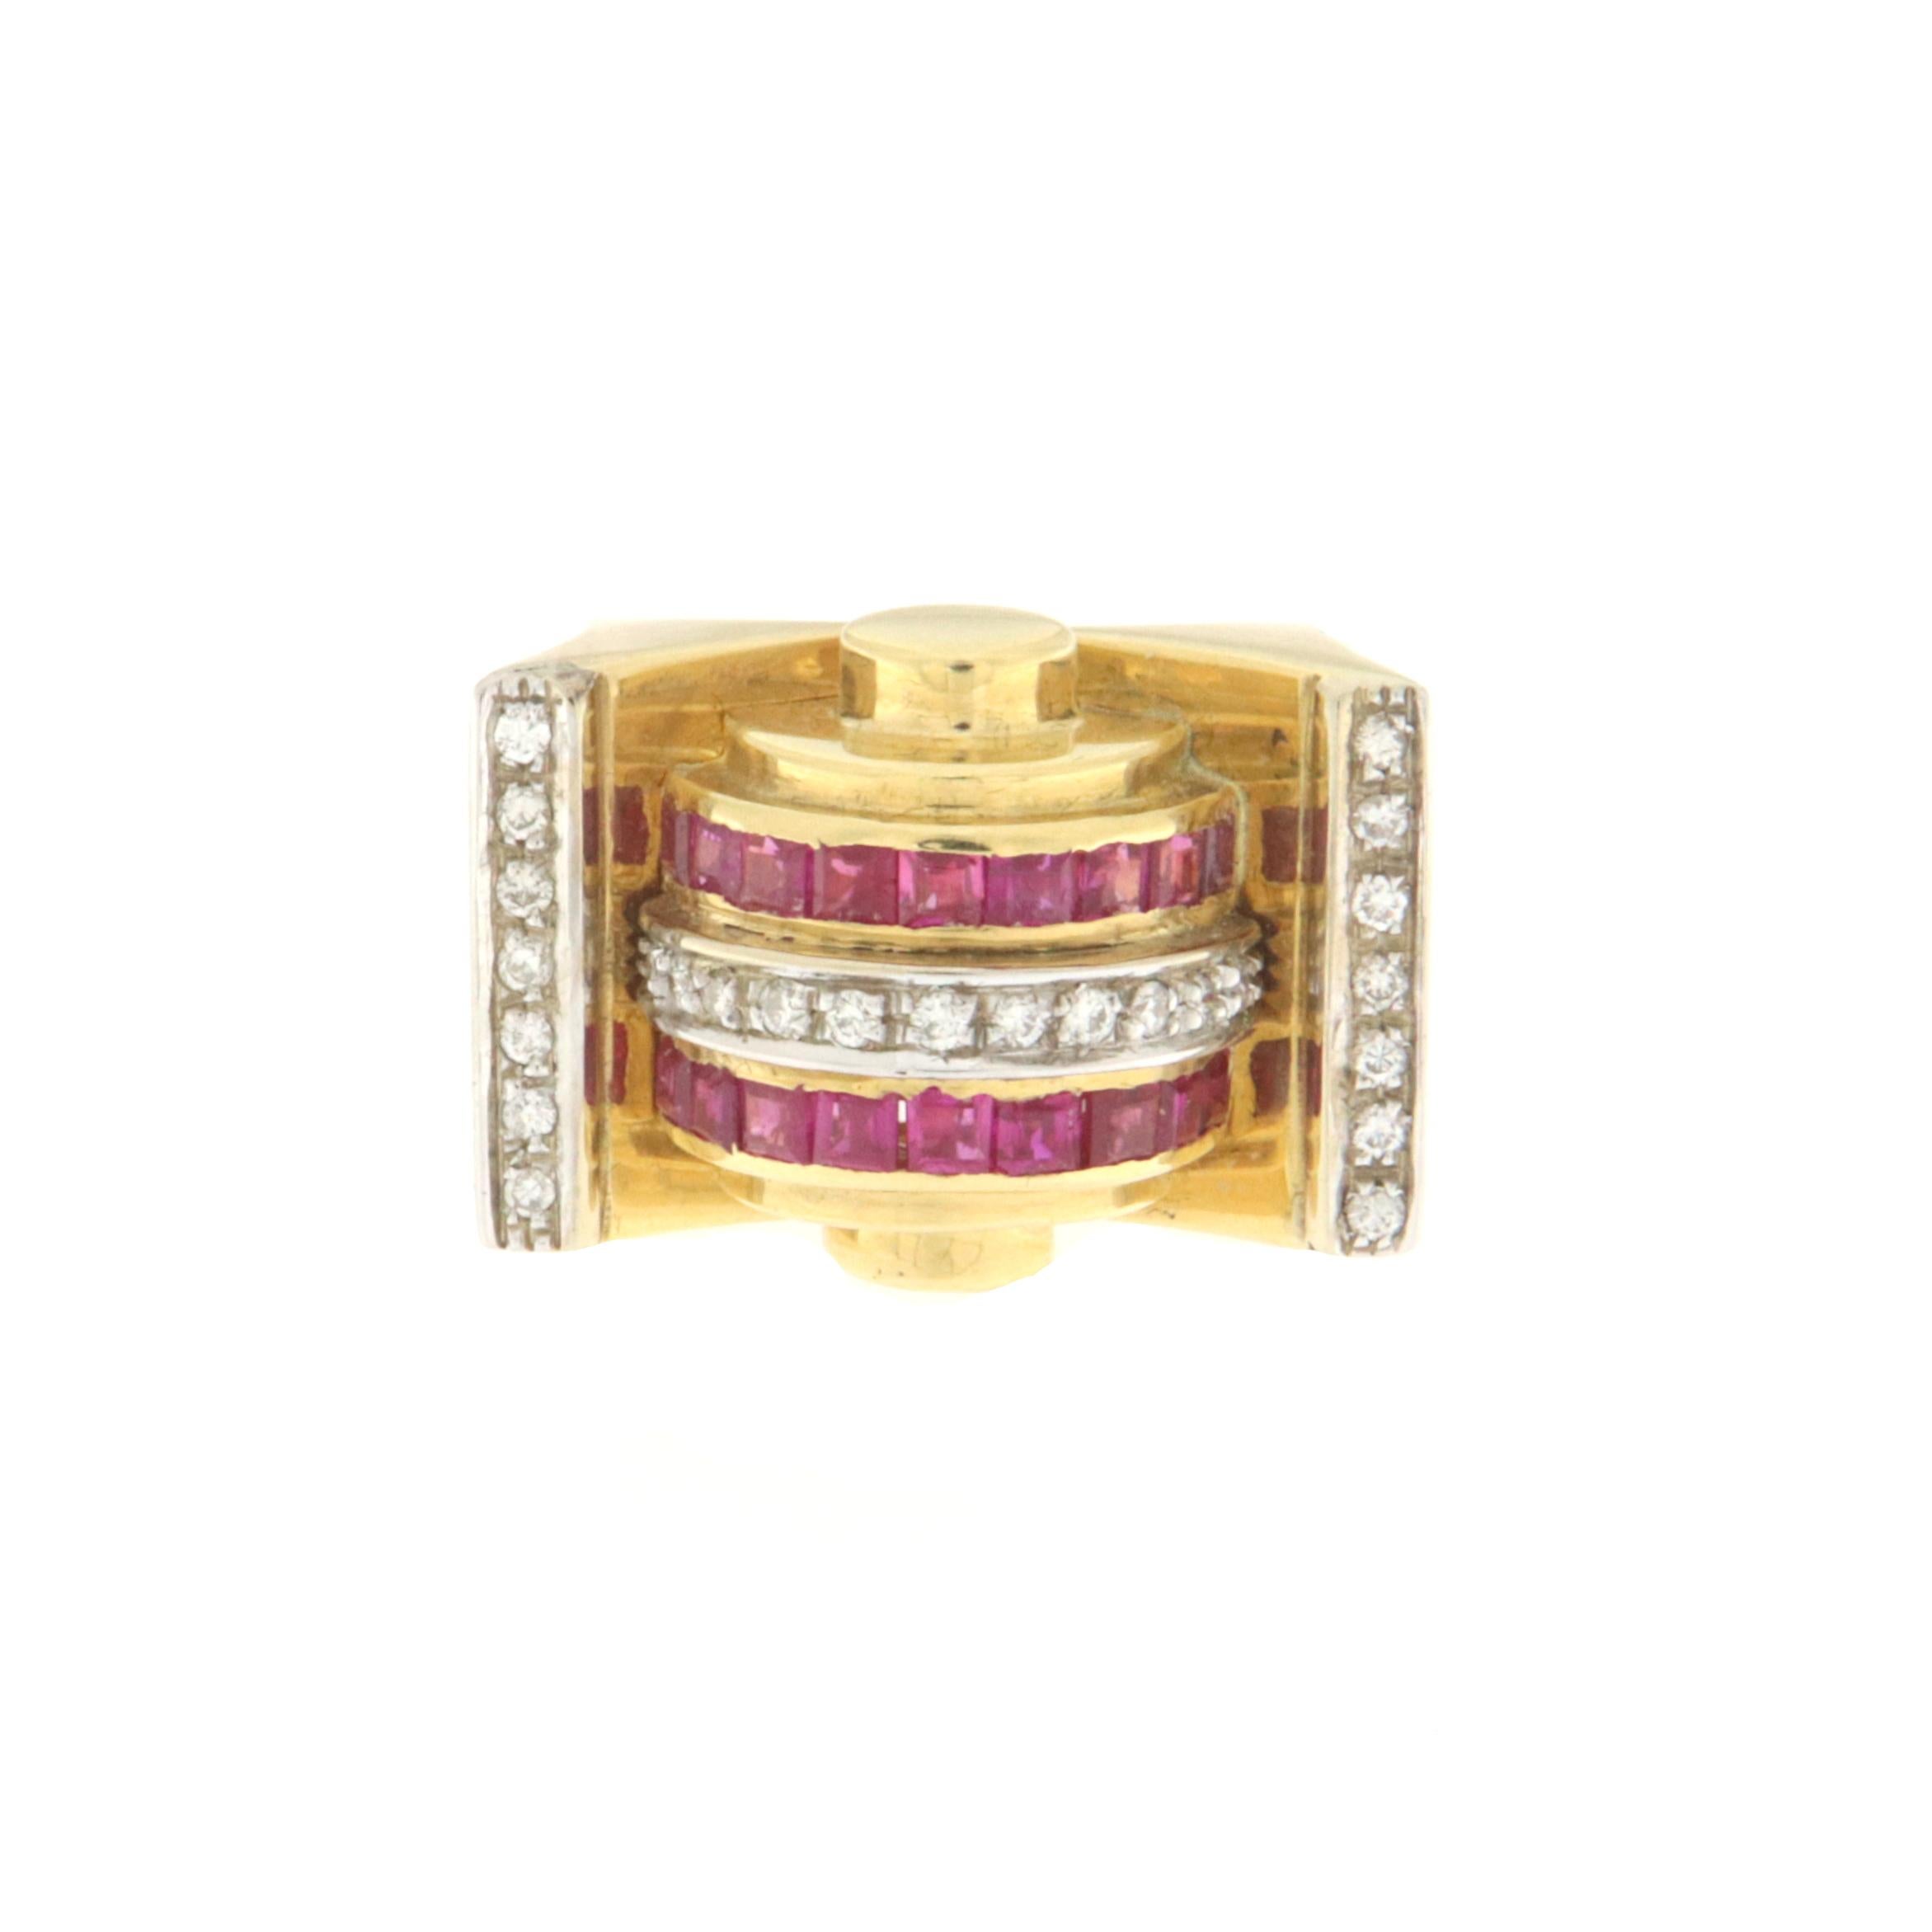 This exclusive ring in 18-karat yellow gold is a masterpiece of elegance and charm, perfect for those seeking a distinctive jewel. Its yellow gold structure, chosen for the warmth and richness of the color, provides a luxurious base that enhances